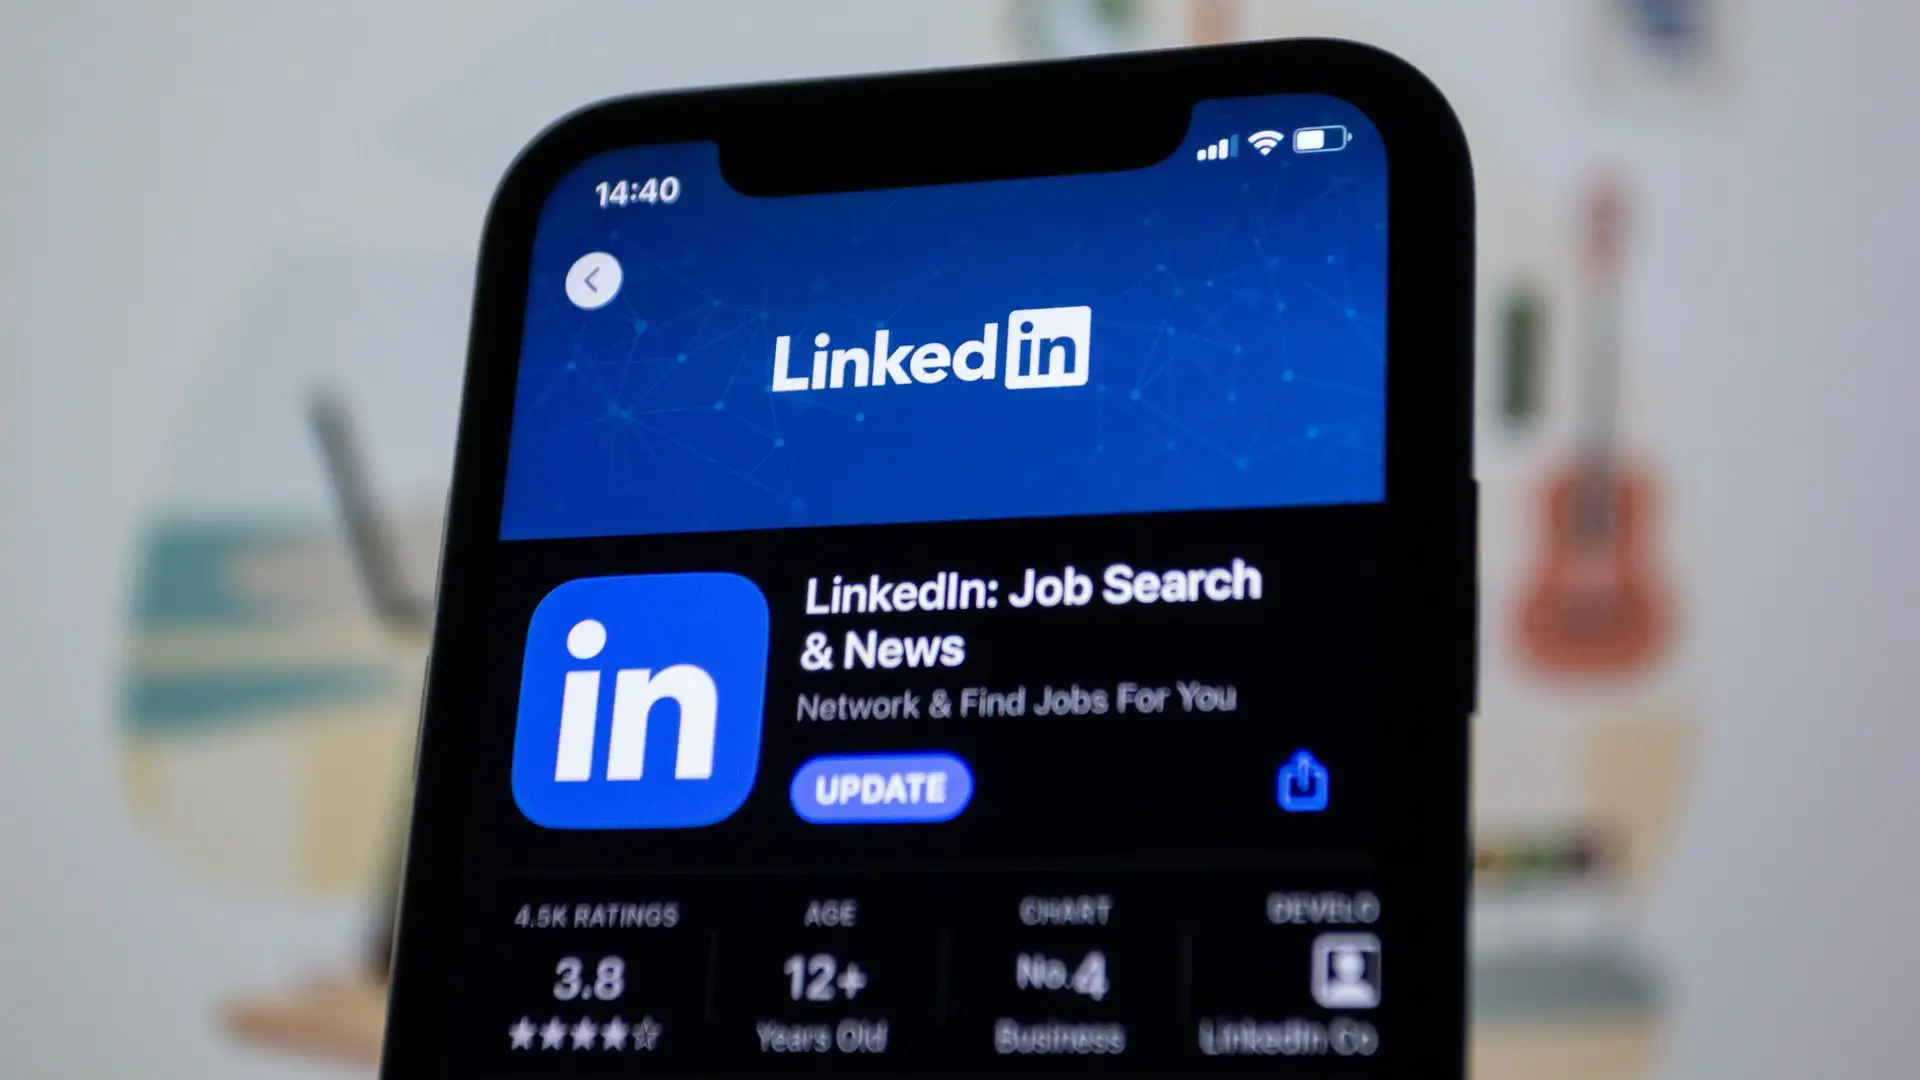 LinkedIn AI won’t take your job but will help you find one